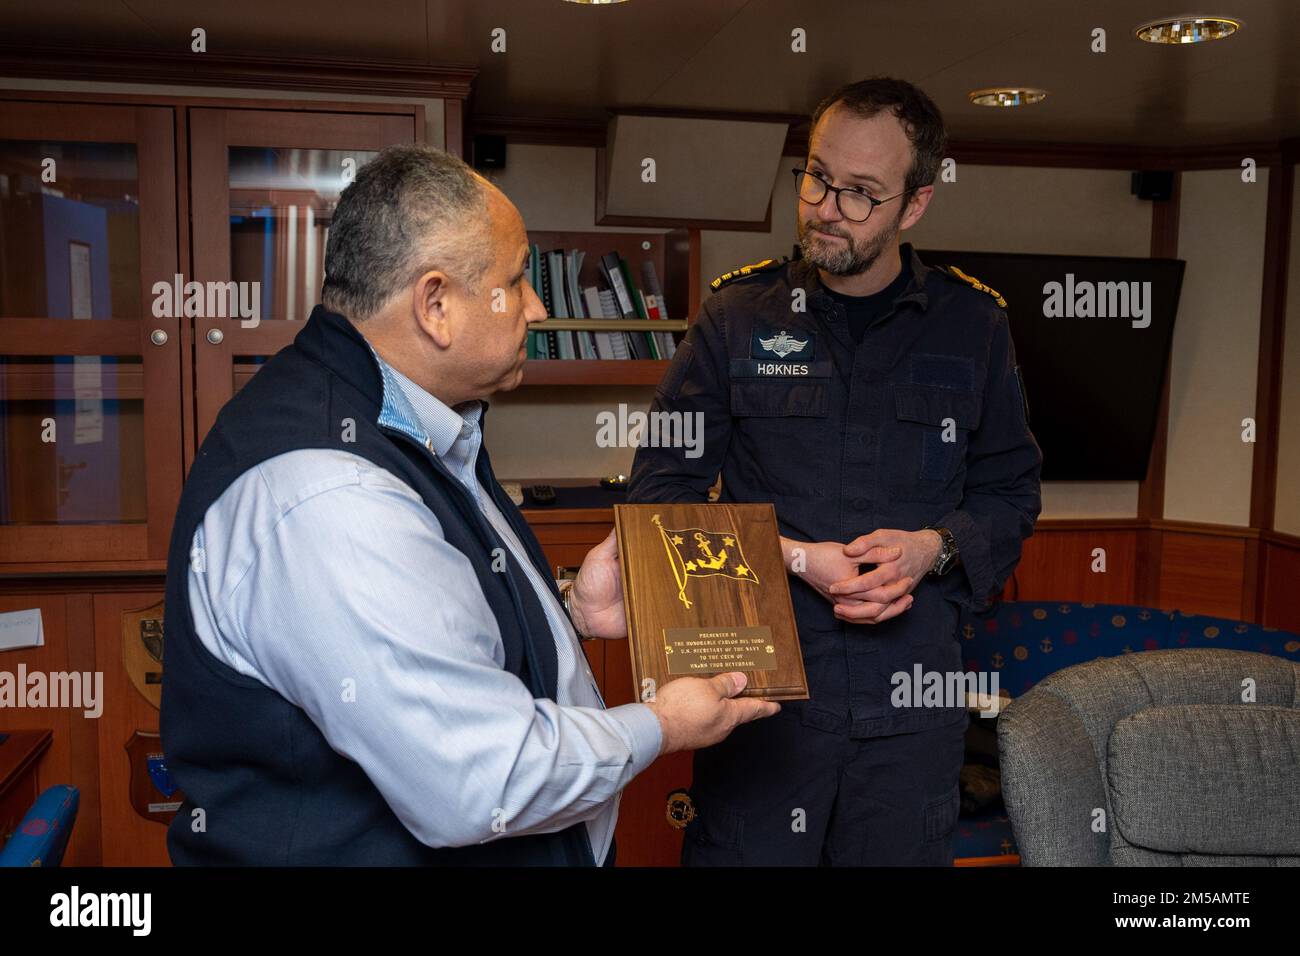 BERGEN, Norway (Feb. 16, 2022) — Secretary of the Navy Carlos Del Toro presents a plaque to Norwegian Cmdr. Lars Ole Høknes, commanding officer of HNoMS Thor Heyerdahl (F314), aboard the ship in Bergen, Norway, Feb. 16, 2022. Secretary Del Toro is in Norway to visit U.S. service members and Norwegian government leaders to reinforce existing bilateral and multilateral security relationships between the U.S. Navy and the Royal Norwegian Navy. Stock Photo